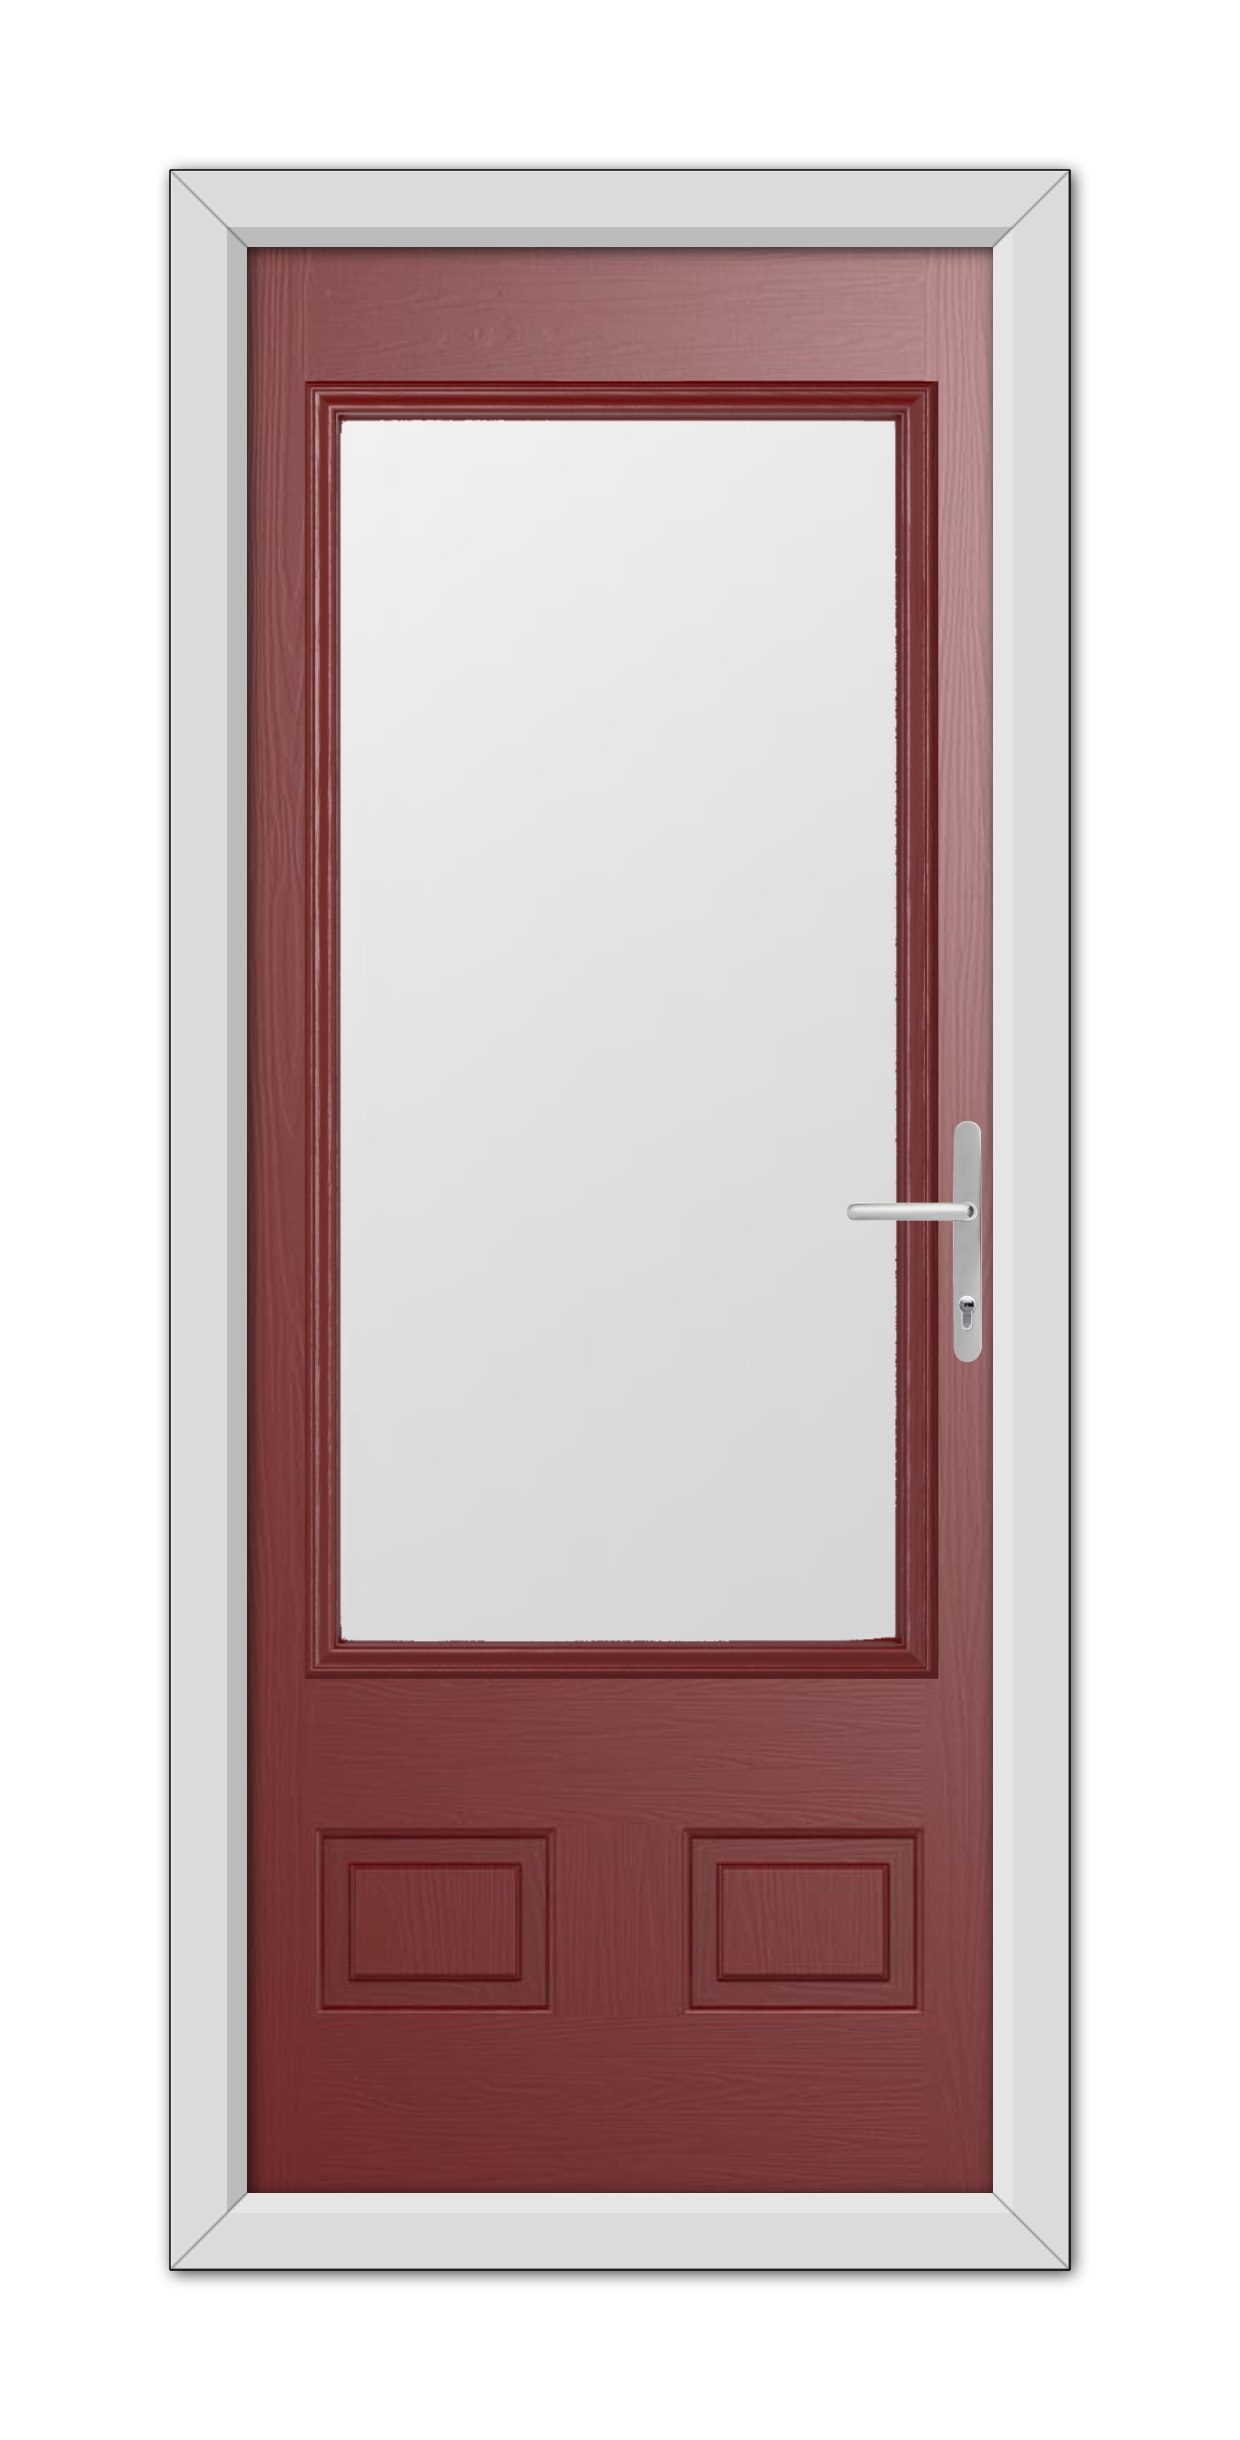 A standard closed red Walcot Composite Door 48mm Timber Core with a white panel, set within a white frame, featuring a metallic handle on the right side.